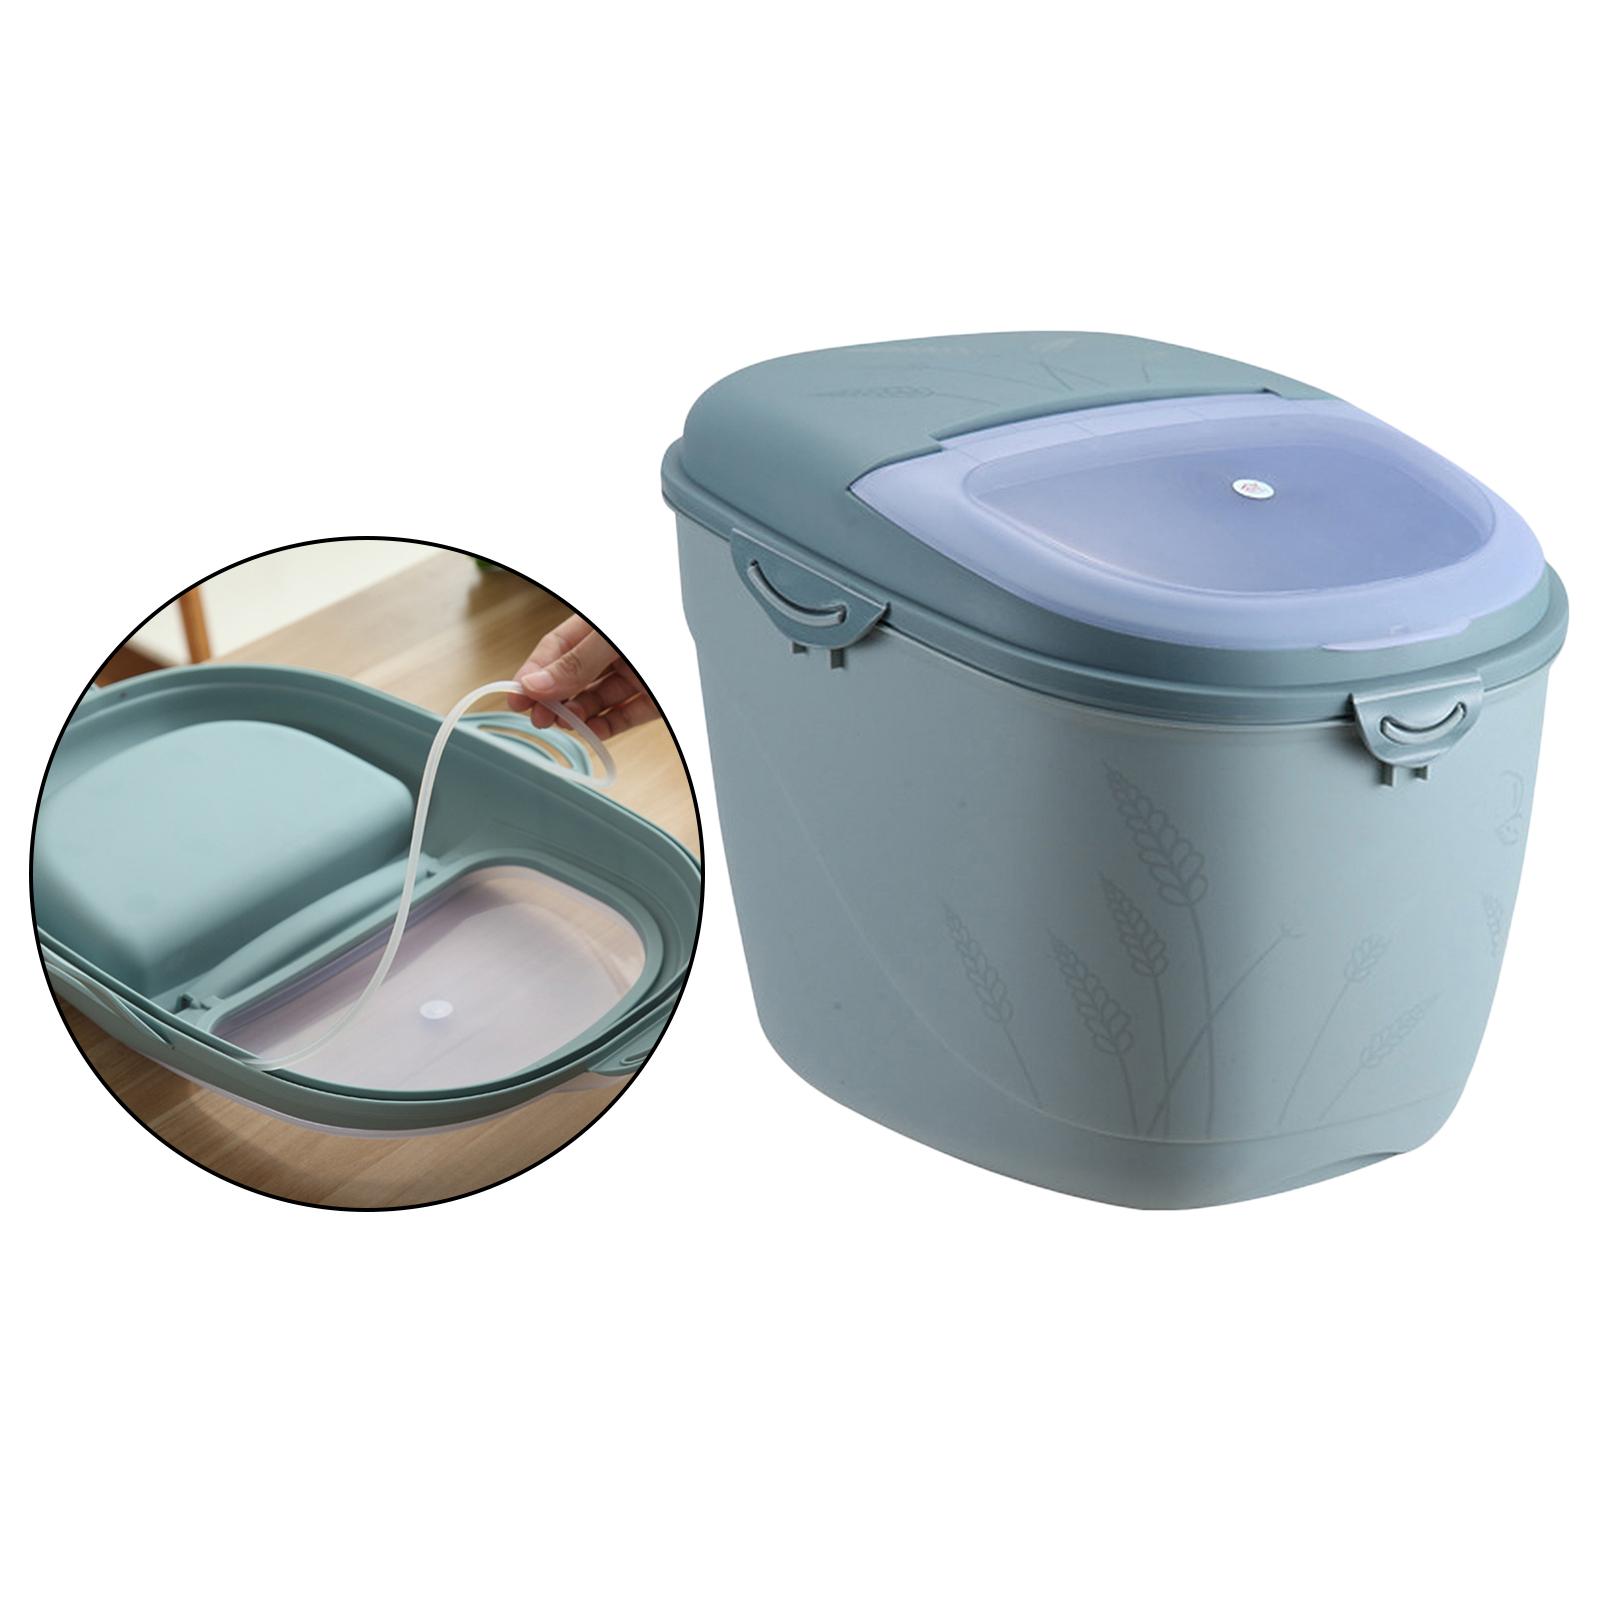 10kg Rice Storage Container Grains Rice Bucket Dry Food Fruit Storage Box for Rice Flour Cereal Kitchen Storage